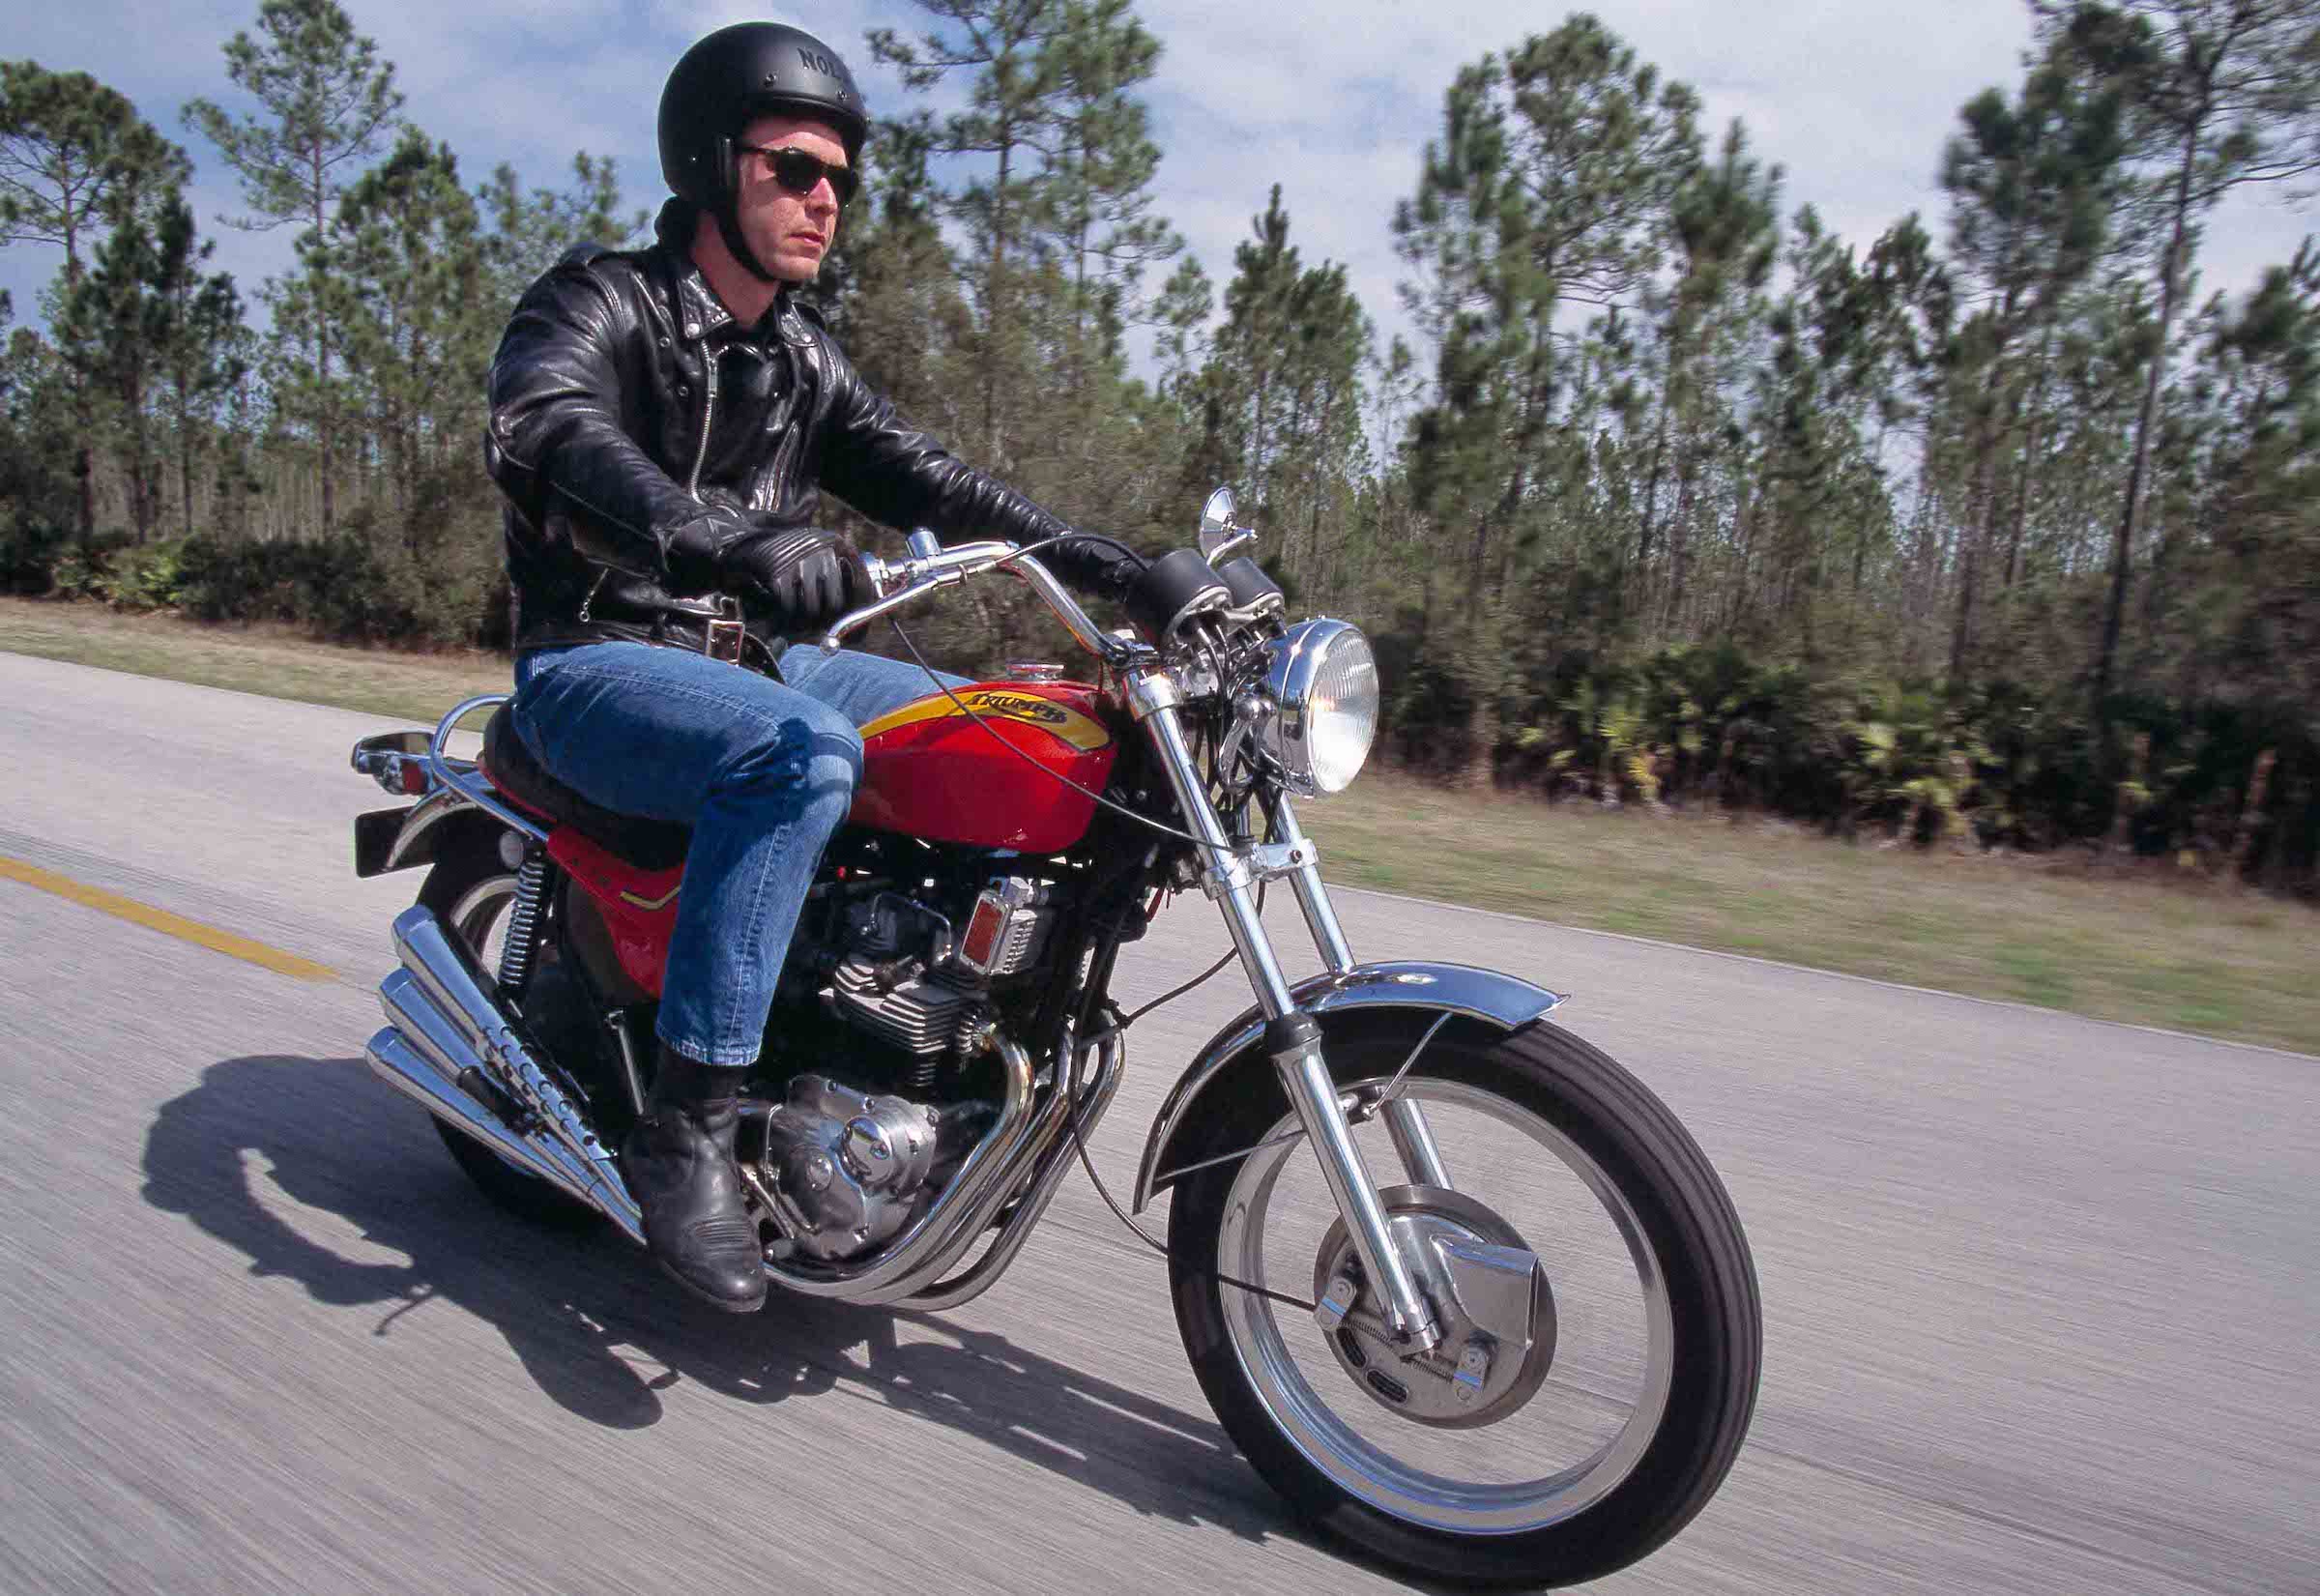 The Triumph X-75 Hurricane's speed will blow you away